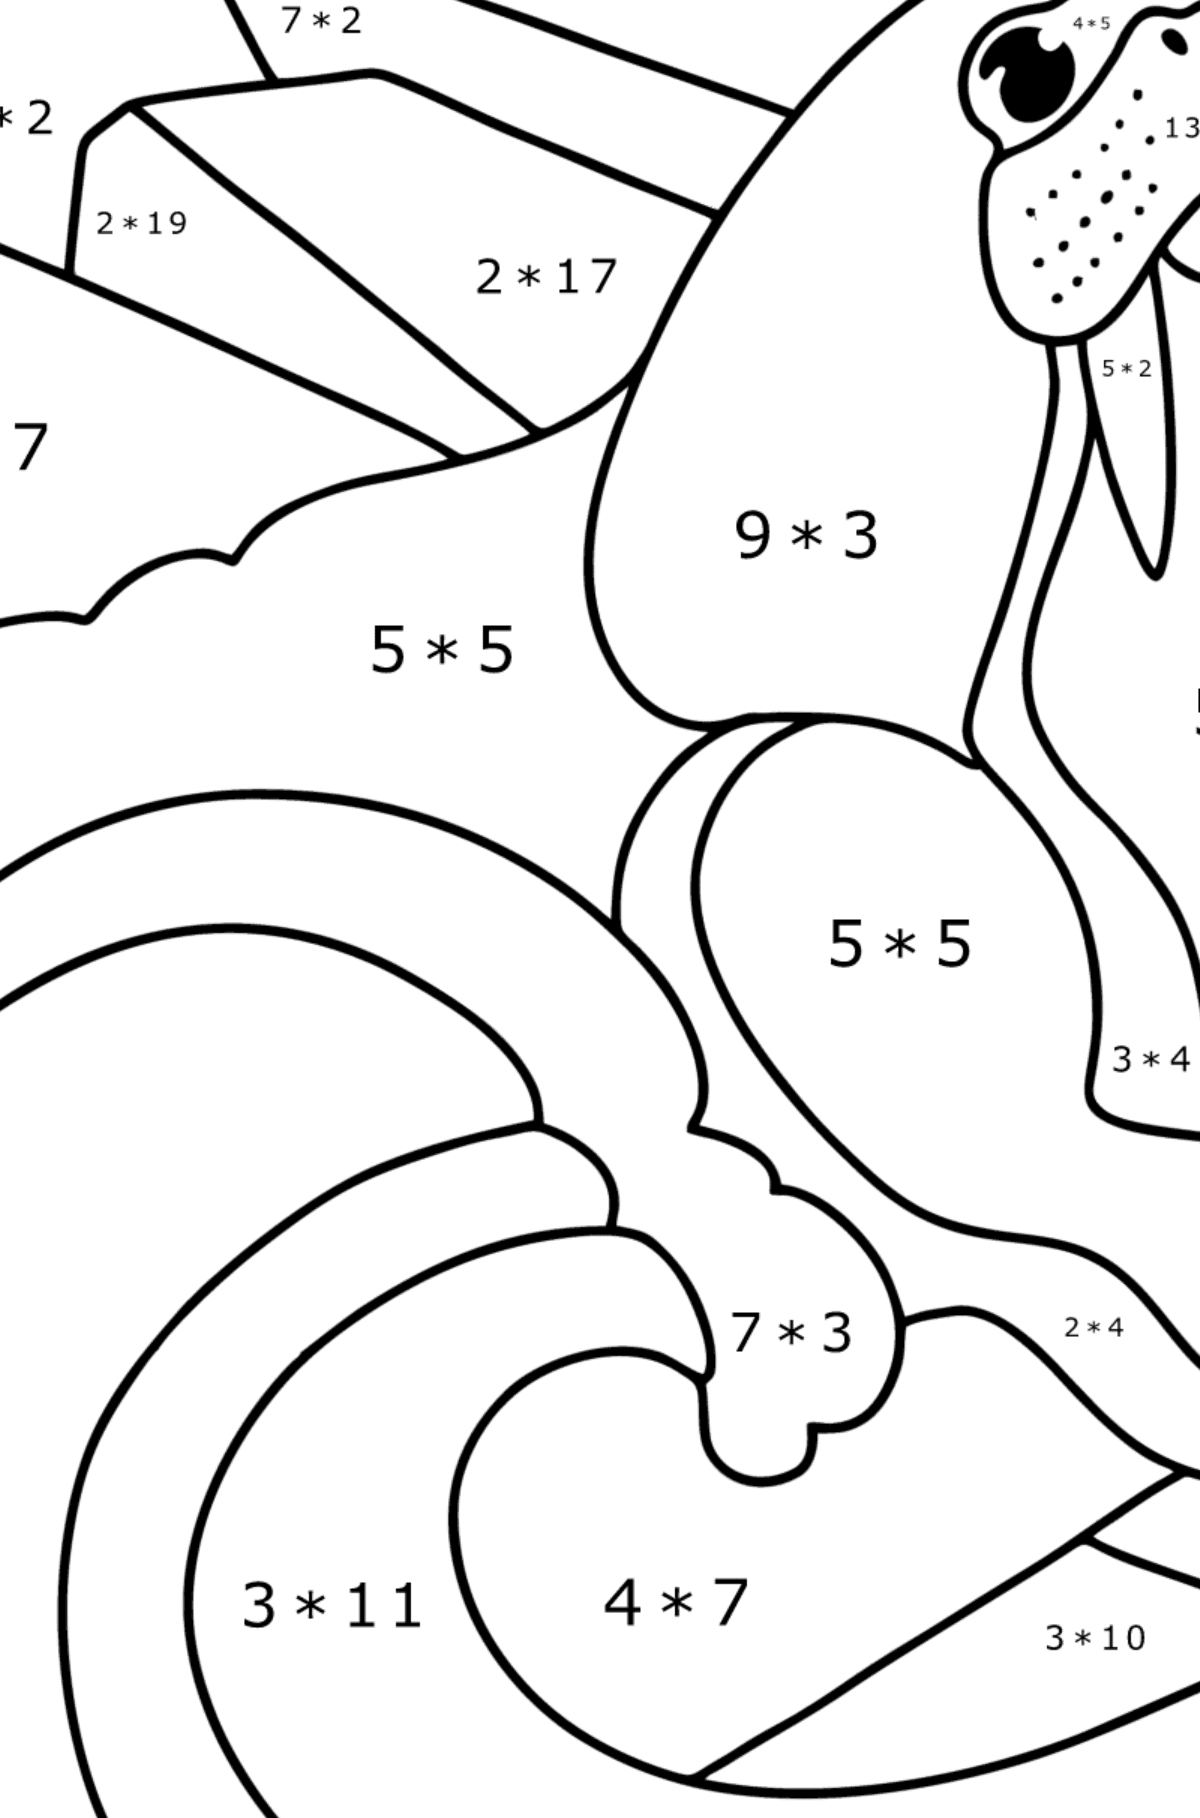 Atlantic Walrus coloring page - Math Coloring - Multiplication for Kids